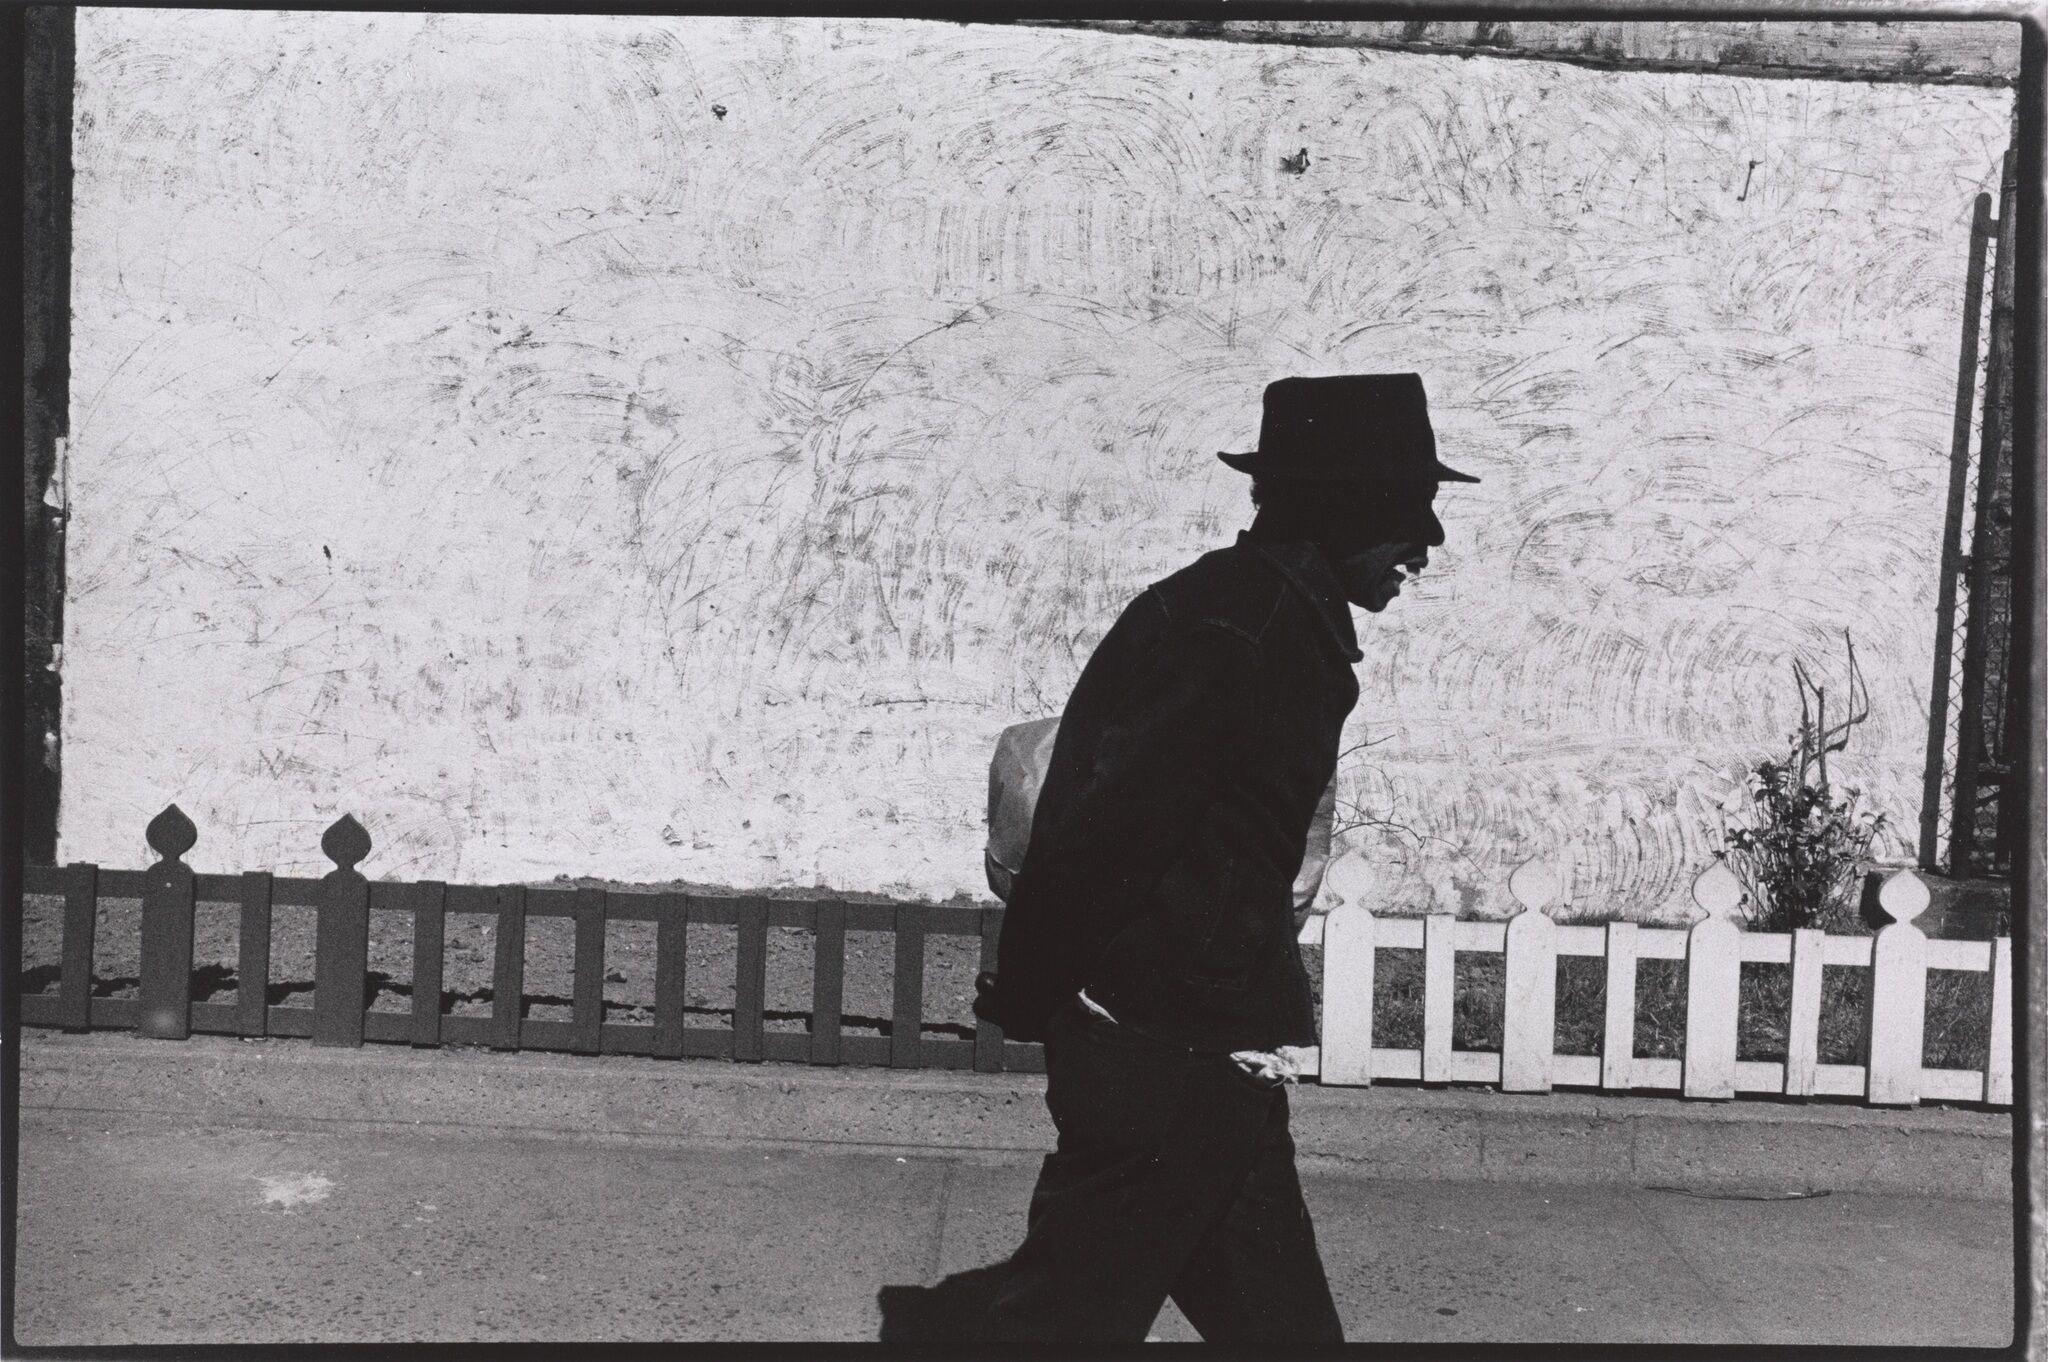 A picture of a man in black walking against a white wall